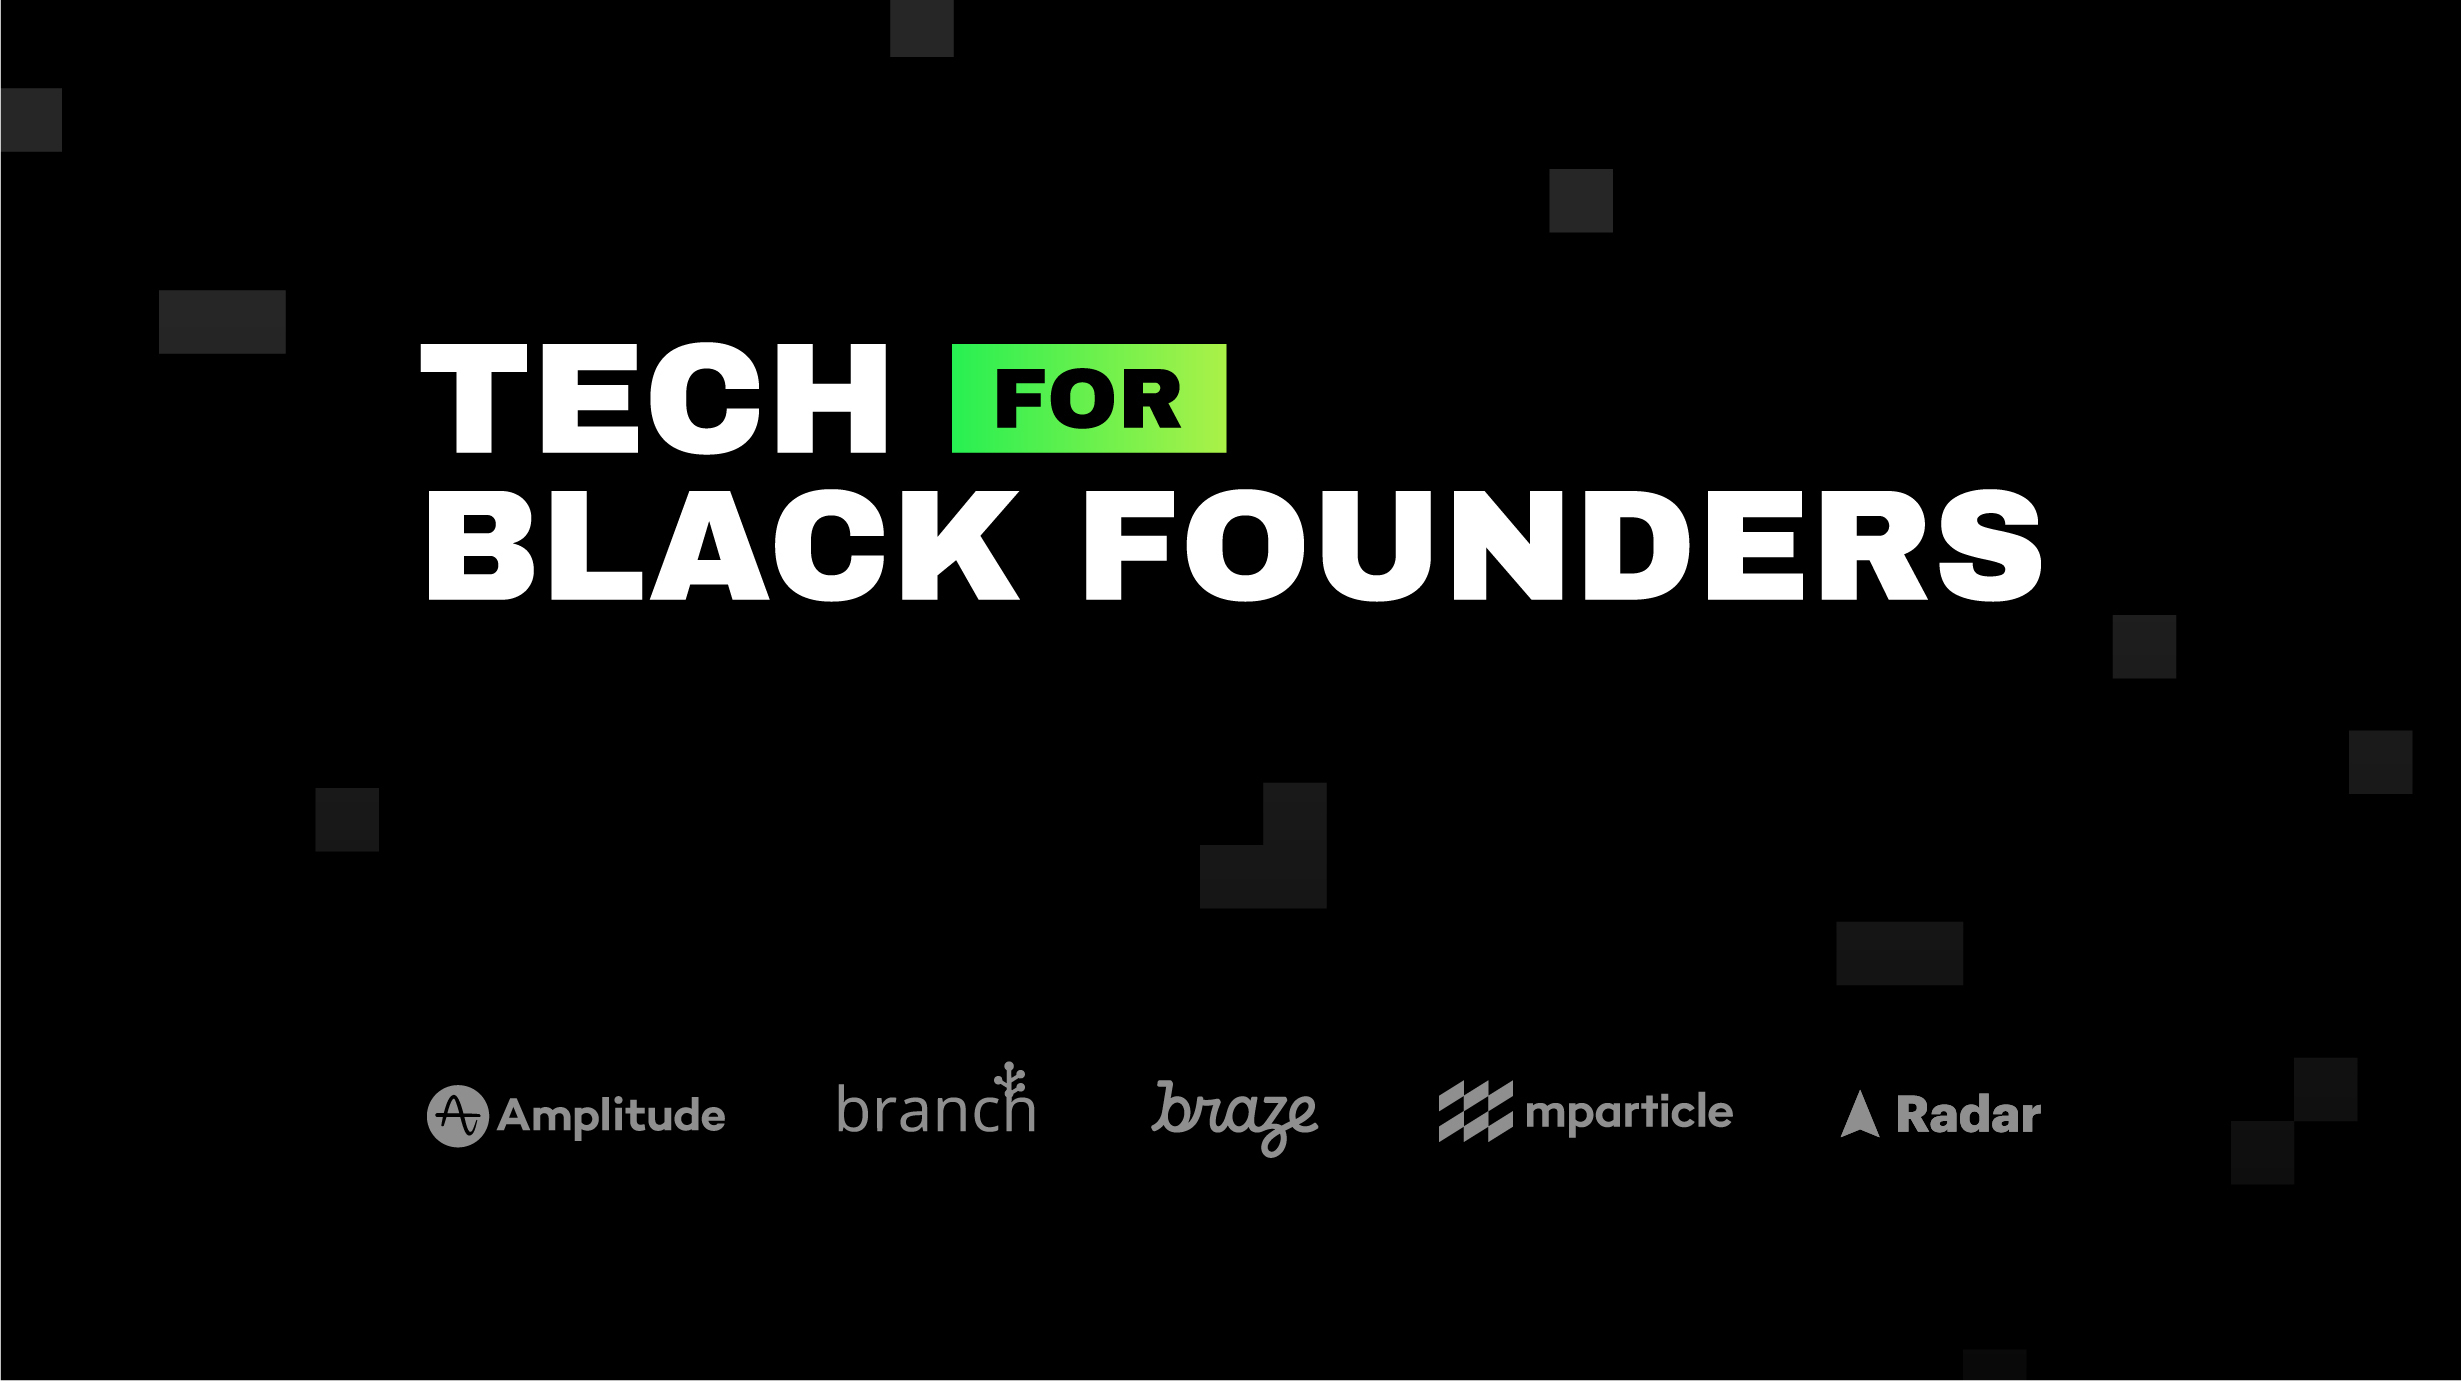 Several MarTech Firms to Give Away Free Services to Black-Founded Startups